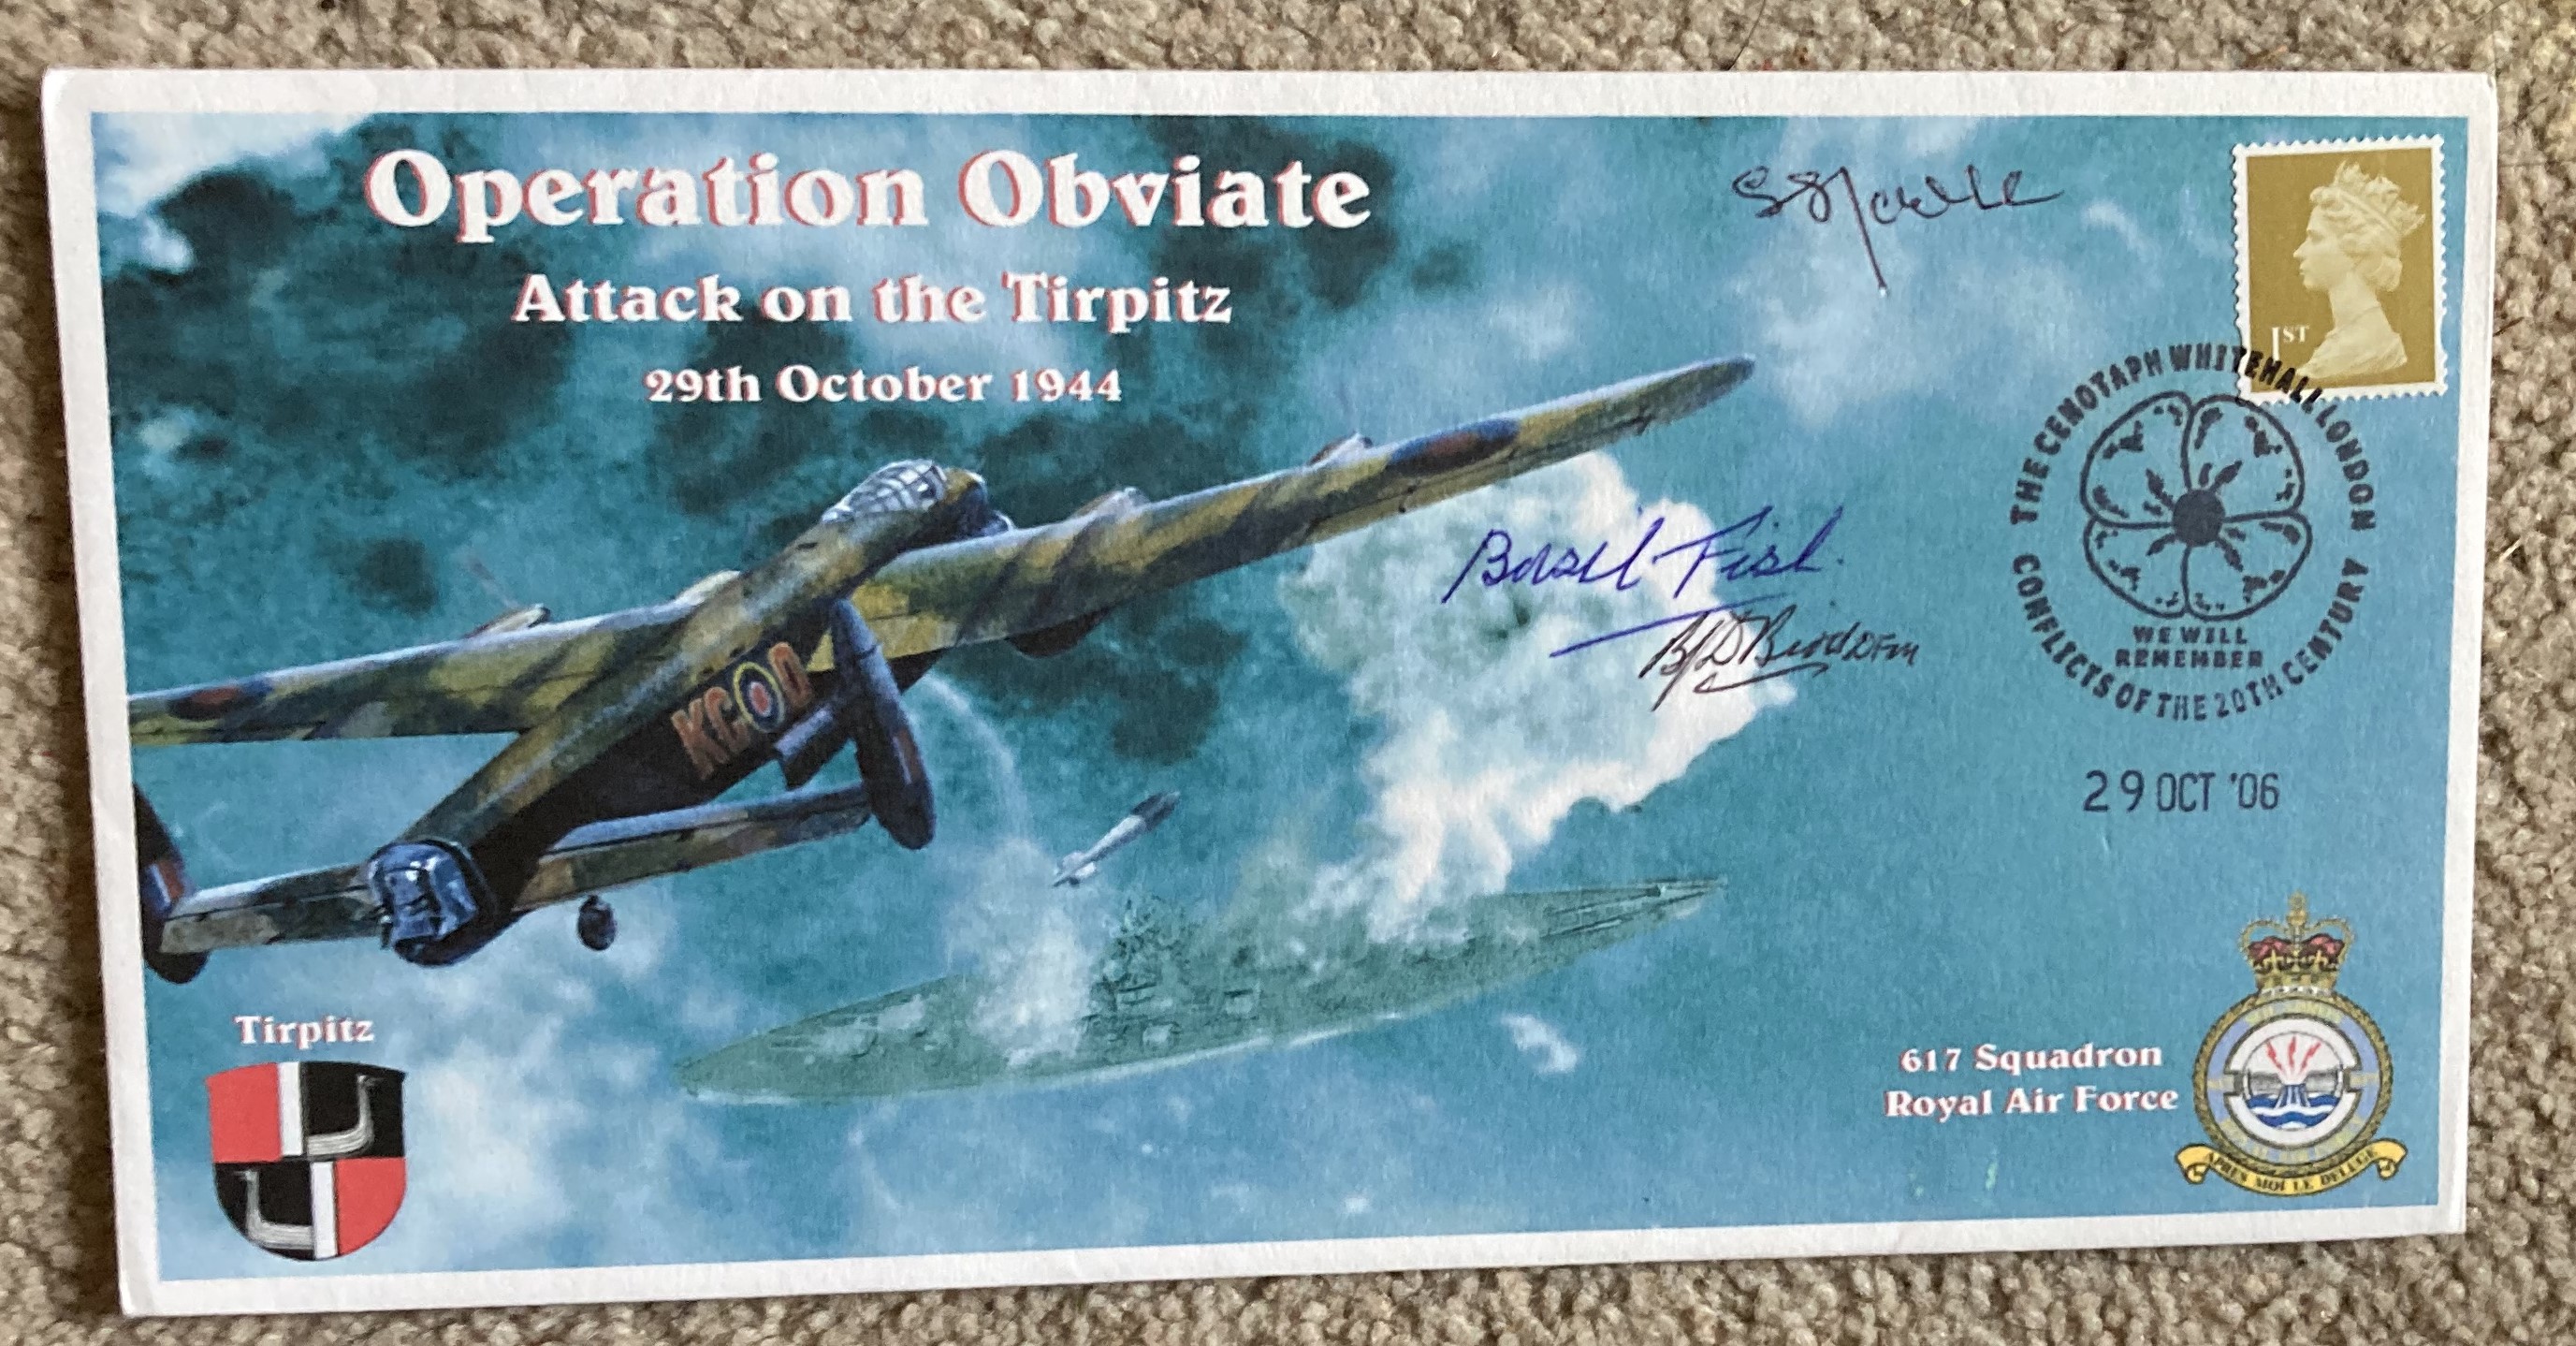 WW2 Operation Obviate Tirpitz raid cover signed by 617 sqn veterans Basil Fish, B Bird DFM and S